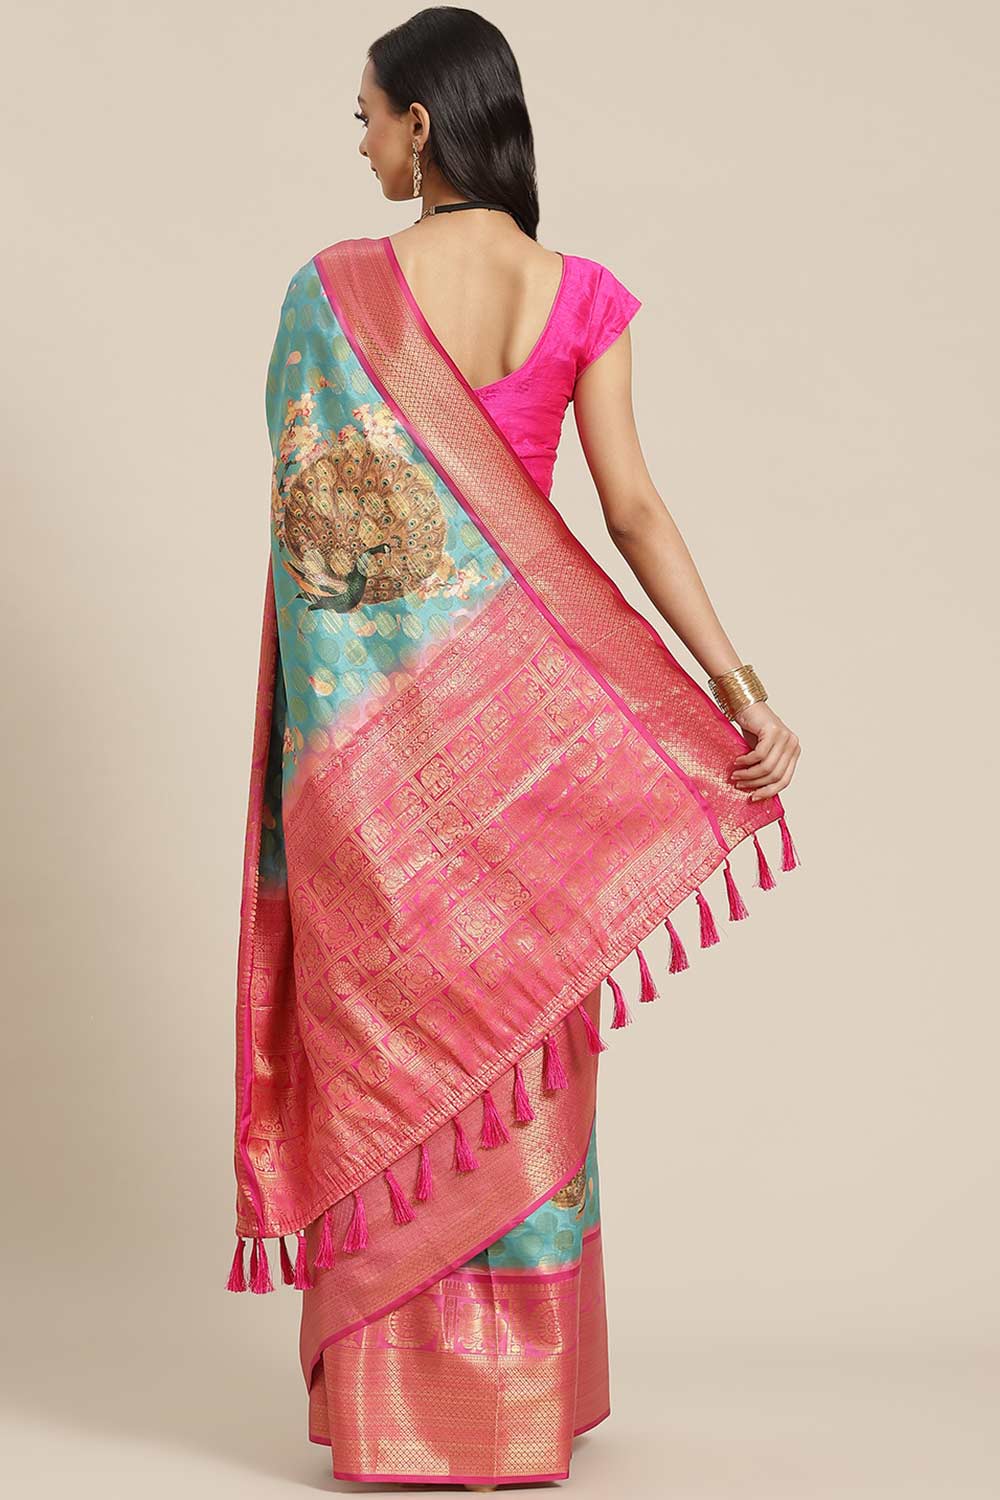 Shop Tina Teal Soft Art Silk Floral Printed Banarasi One Minute Saree at best offer at our  Store - One Minute Saree